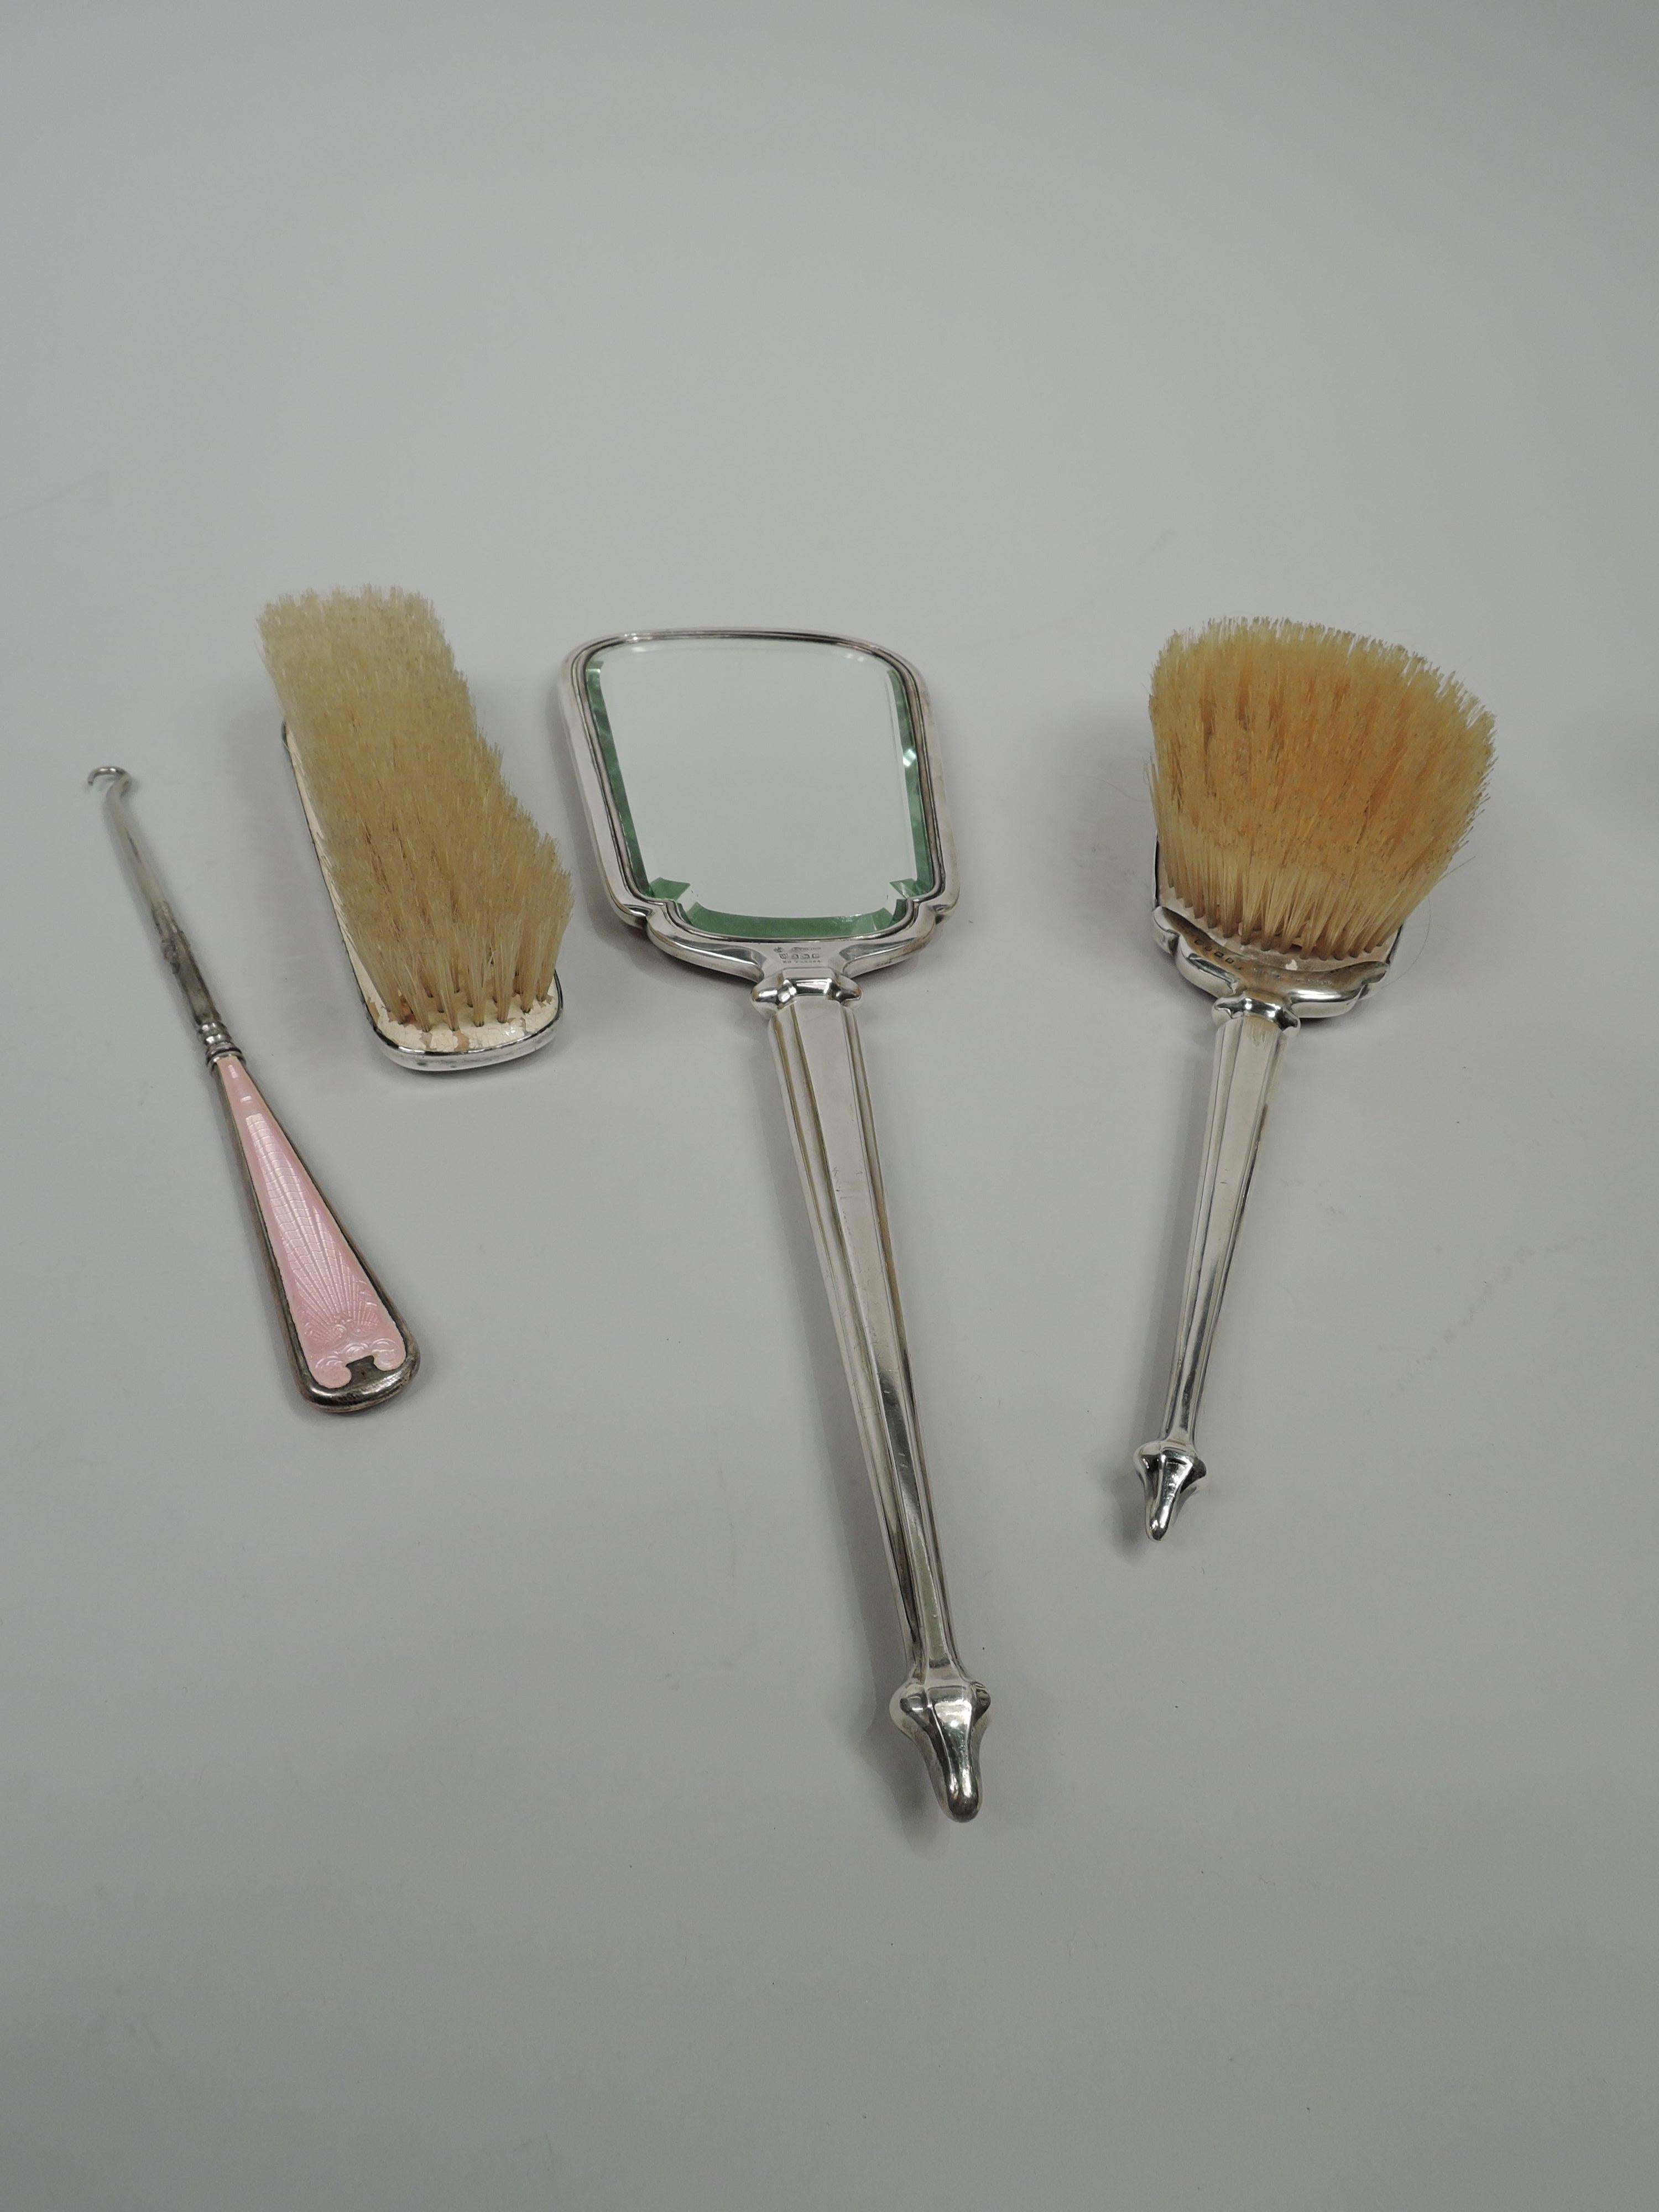 George V sterling silver and pink guilloche enamel vanity set. Made by Charles S. Green & Co., Ltd in Birmingham in 1927-8. This set comprises 4 pieces: Hand mirror, hairbrush, clothes brush, and button hook. Mirror and hairbrush have armorial backs